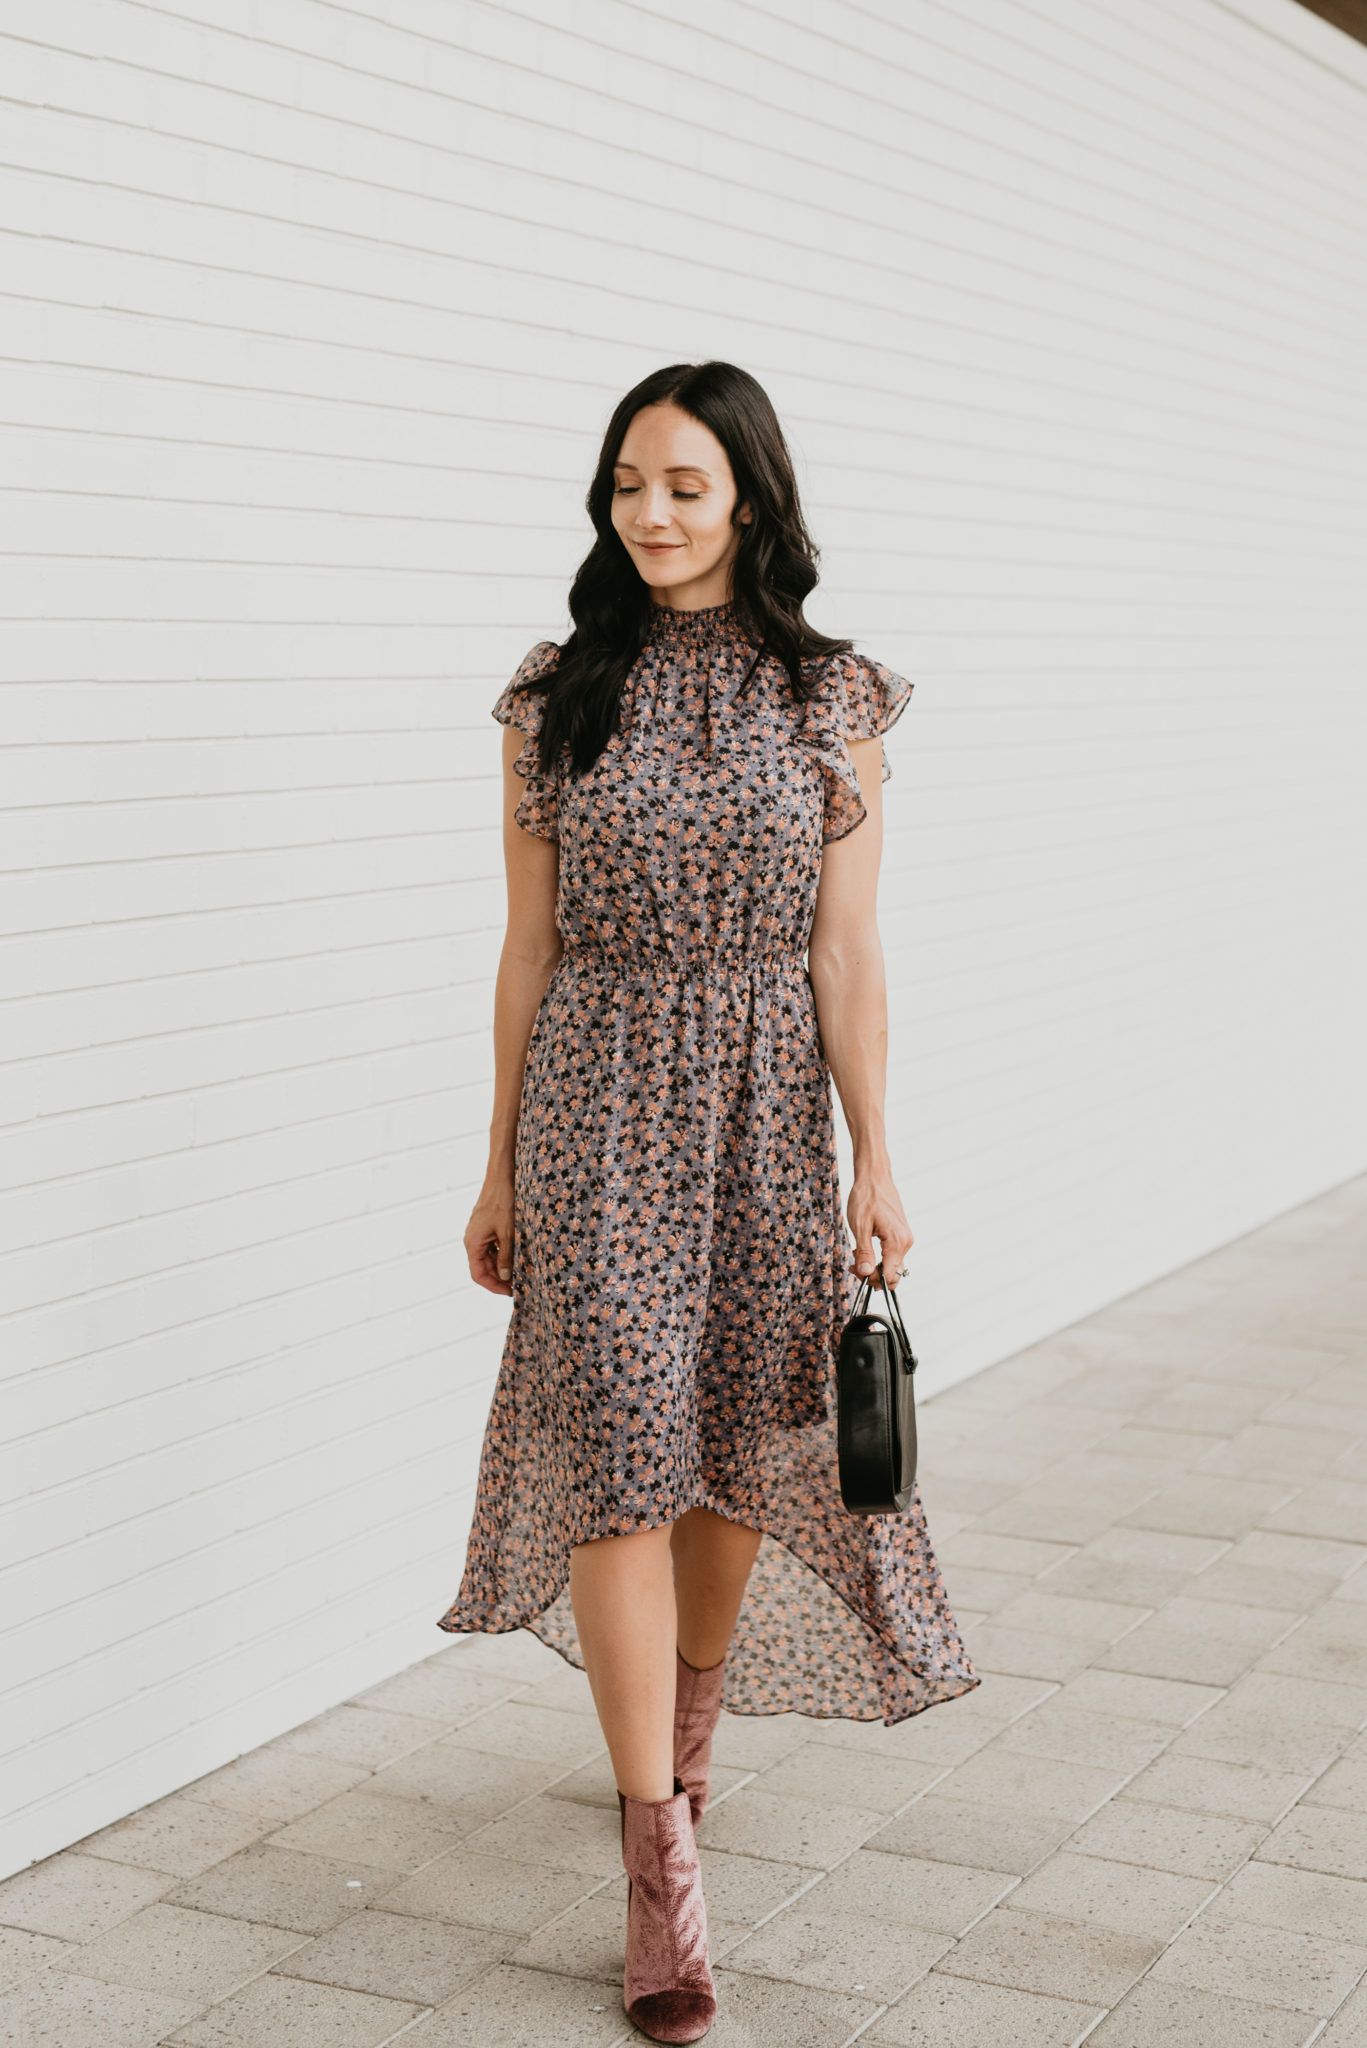 Macy's High Low Floral Dress styled by top Las Vegas fashion blog, Outfits & Outings